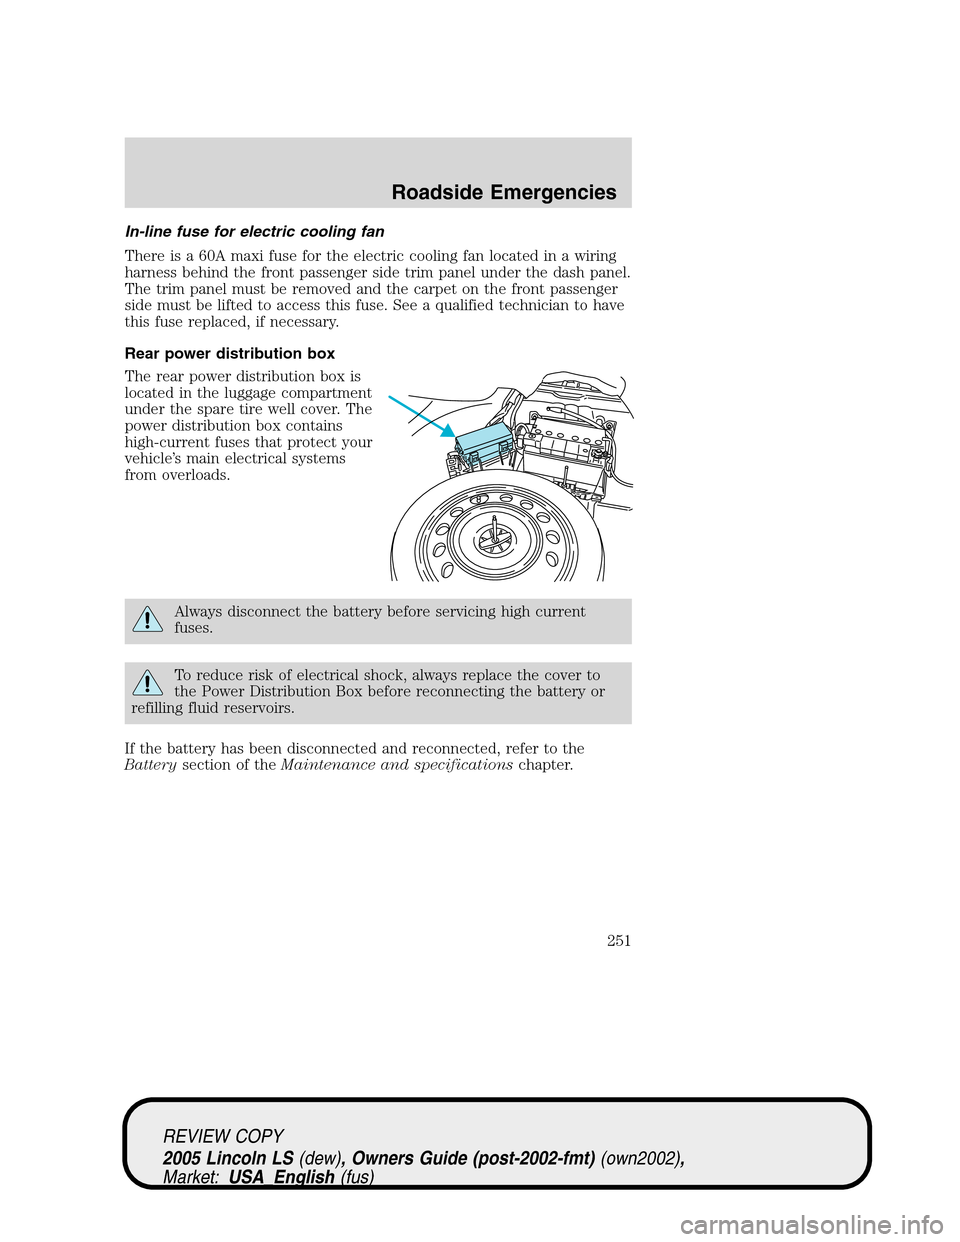 LINCOLN LS 2005  Owners Manual In-line fuse for electric cooling fan
There is a 60A maxi fuse for the electric cooling fan located in a wiring
harness behind the front passenger side trim panel under the dash panel.
The trim panel 